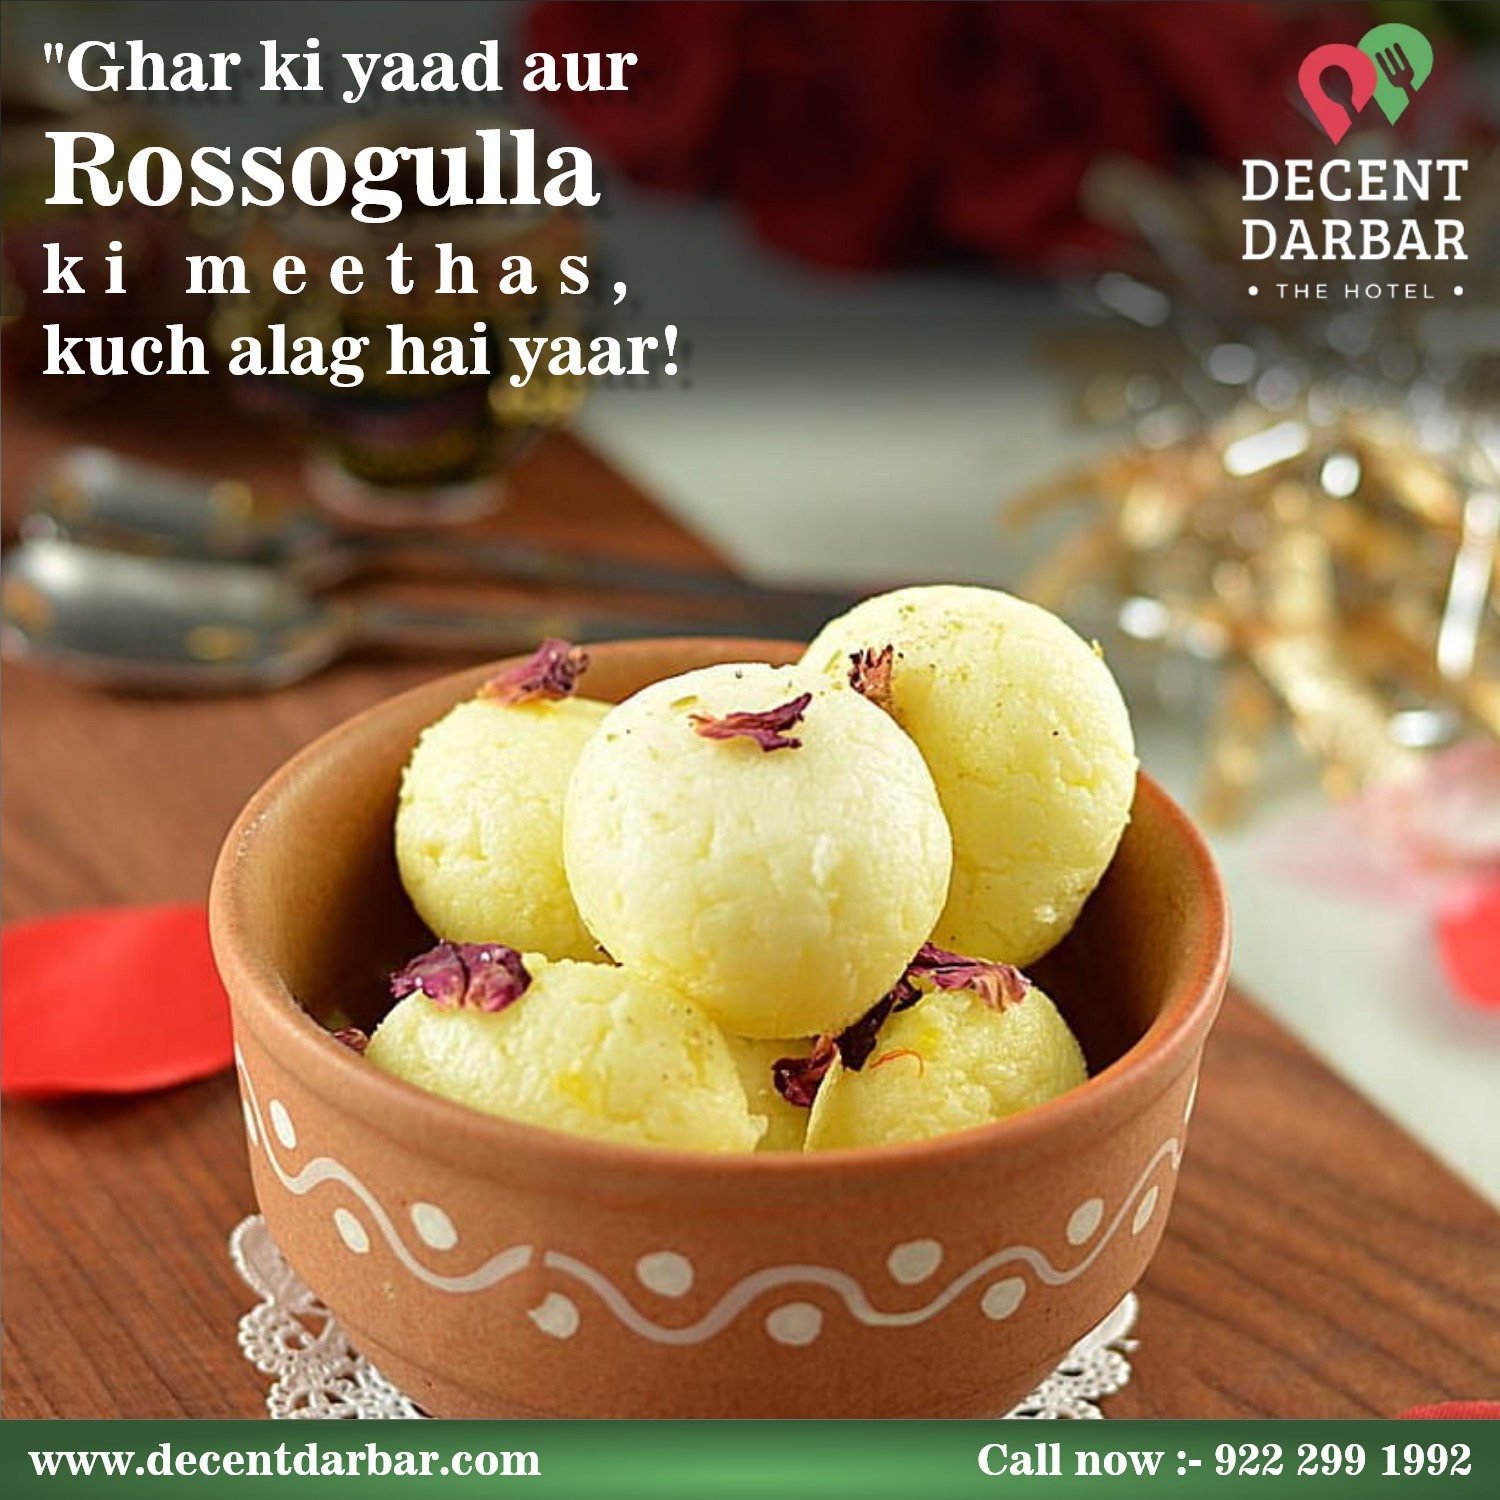 "A taste of India's sweetest delight: Rossogulla!"